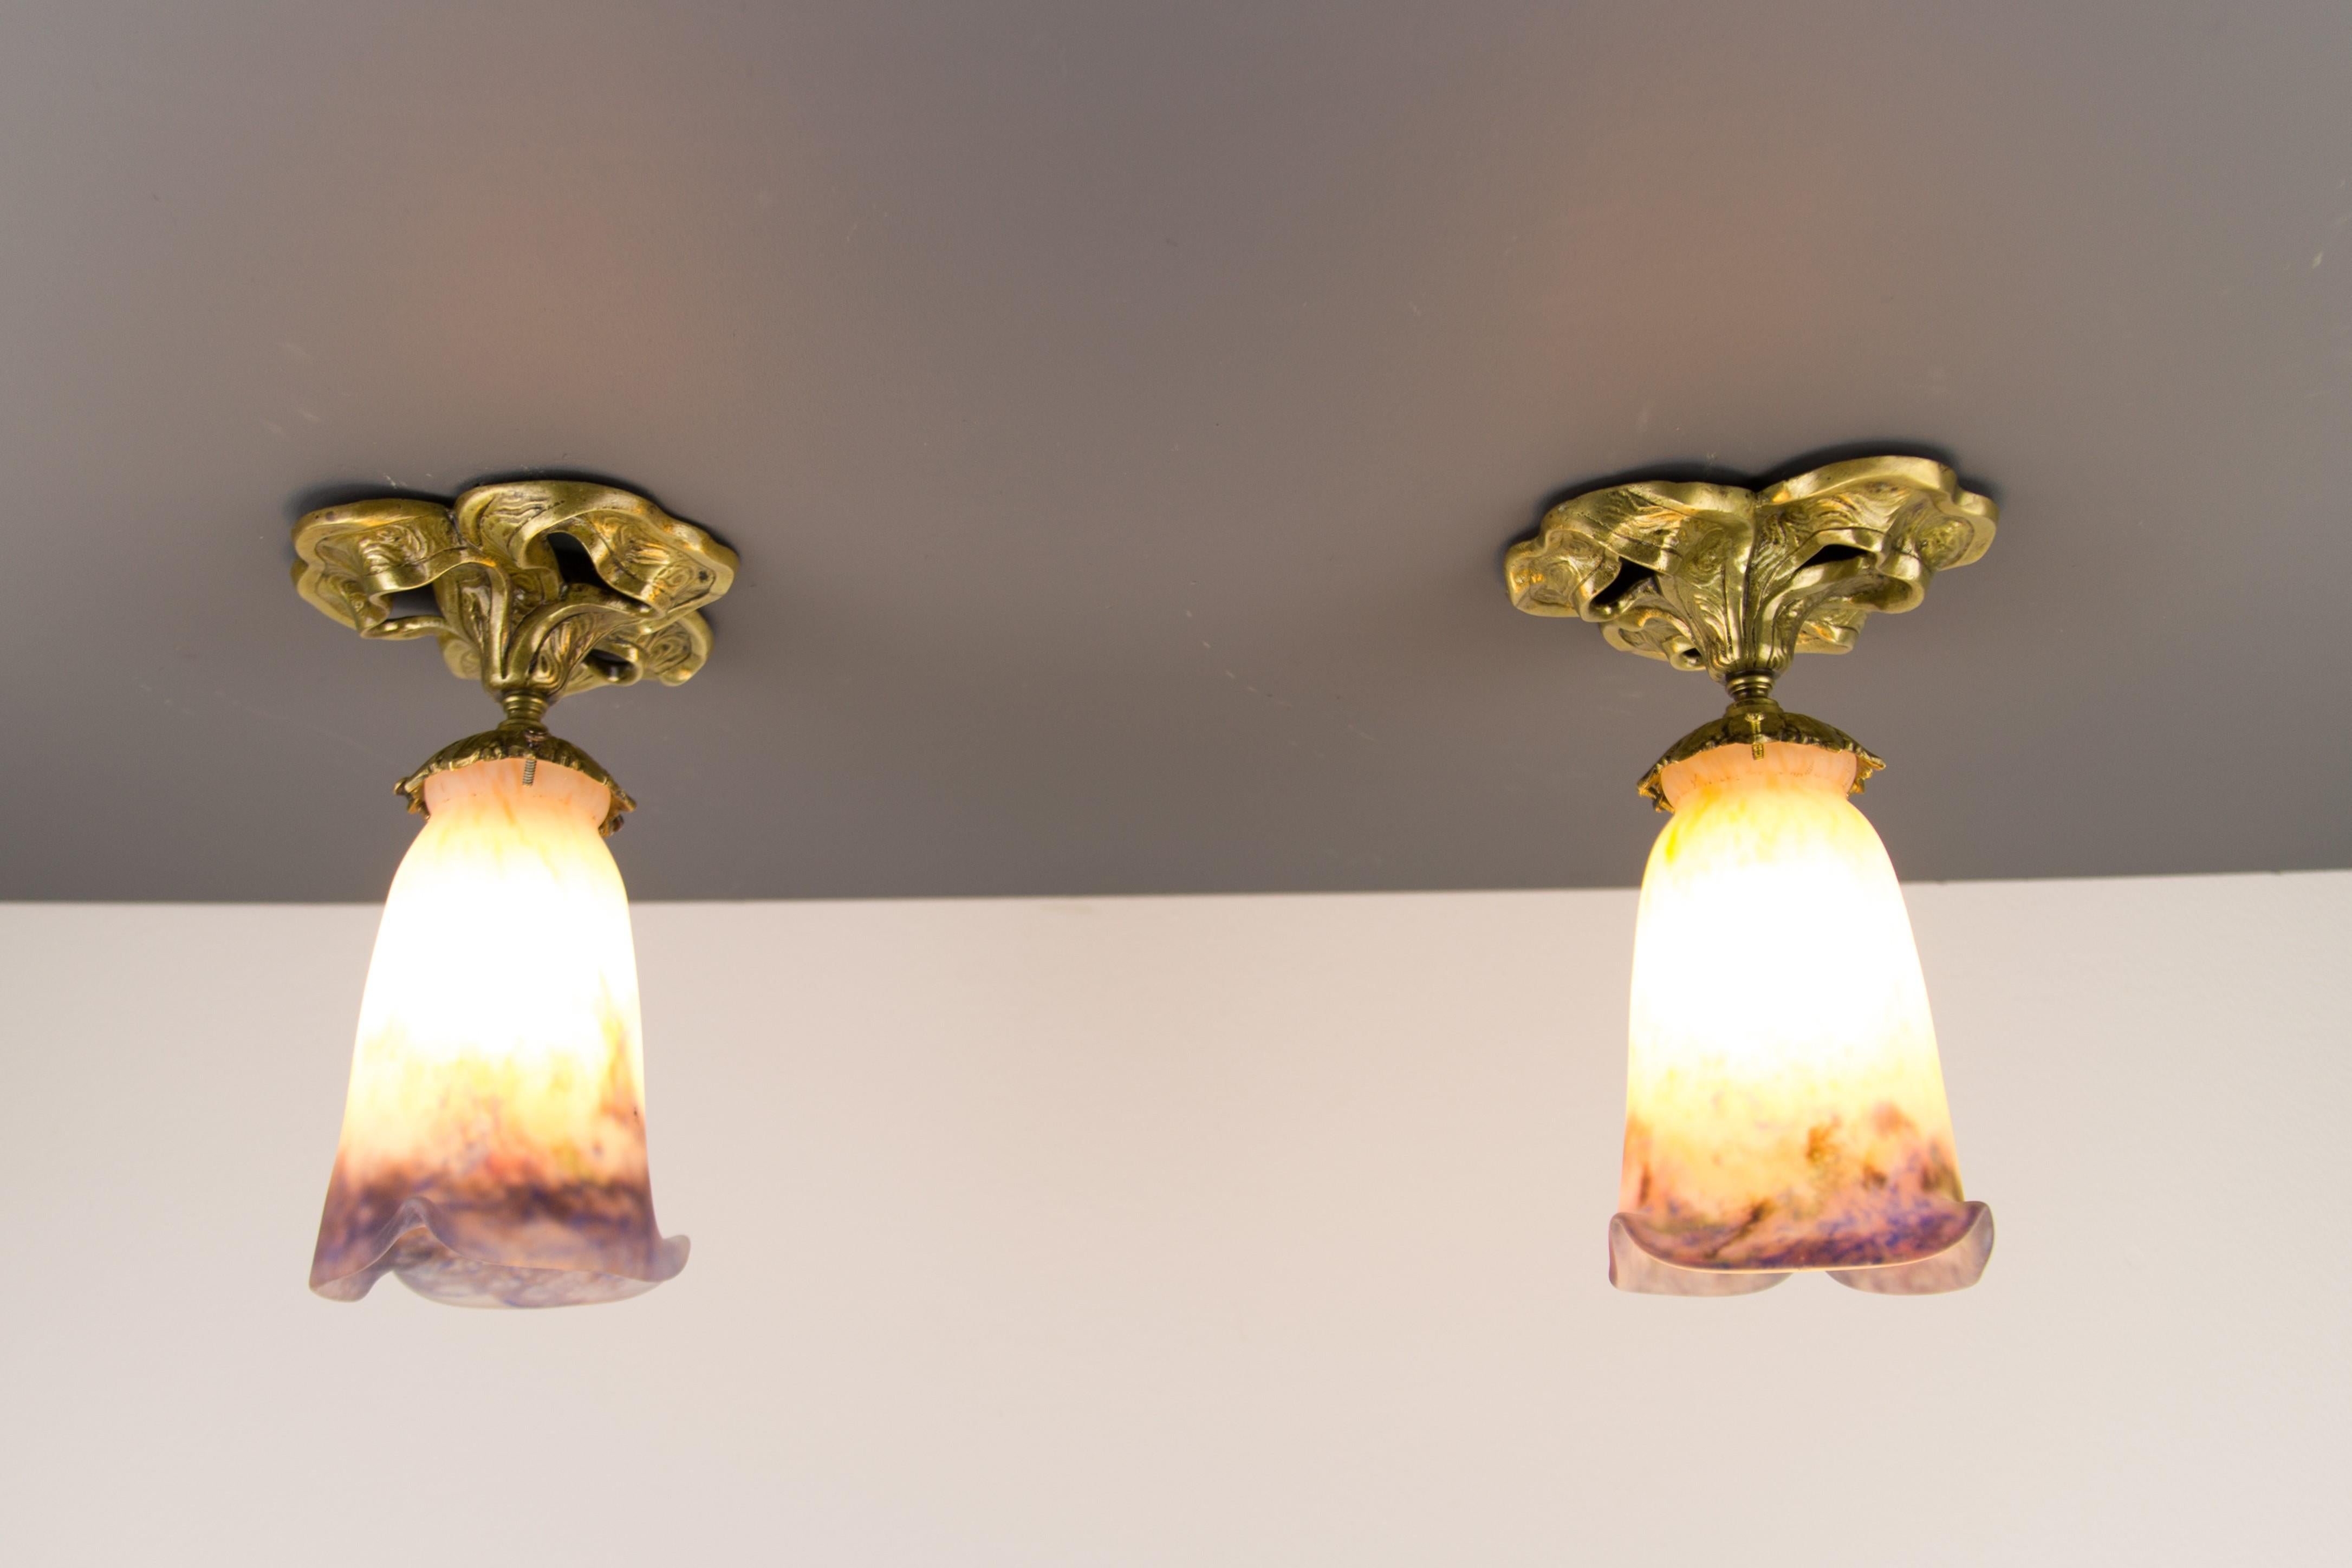 A beautiful pair of Art Nouveau bronze ceiling lamps with pâte de Verre glass shades signed Muller Frères Luneville in cream, blue, purple, and green color.
Each light fixture has one socket for the B22 size light bulb.
Dimensions: height 22 cm /